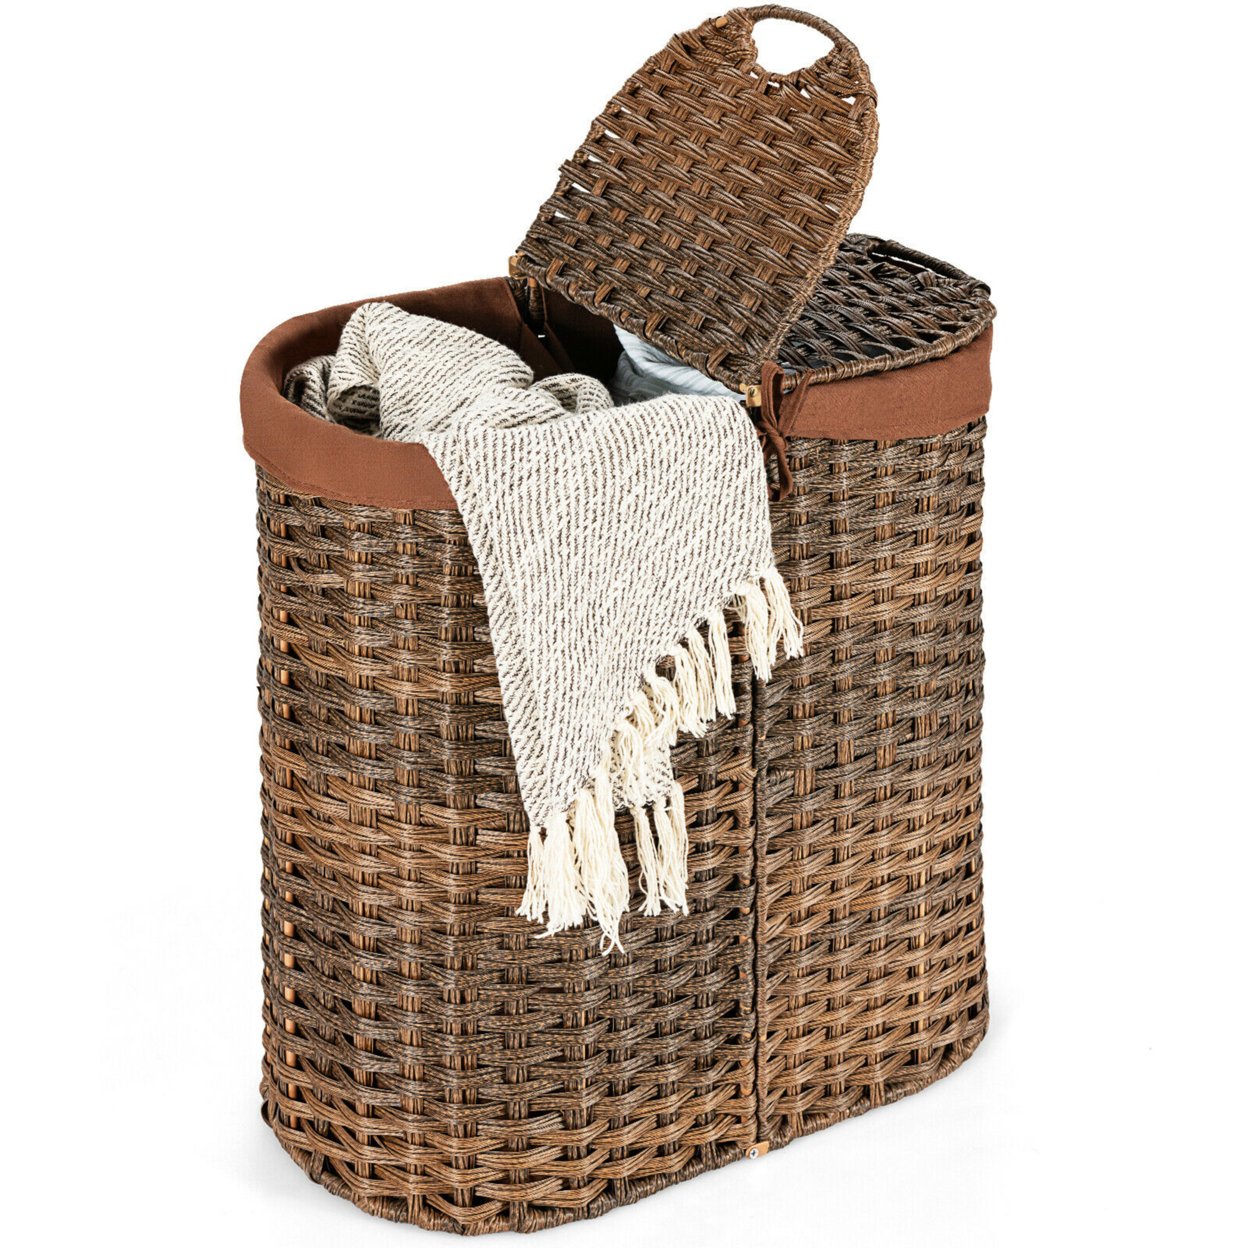 Handwoven Laundry Hamper Laundry Basket W/2 Removable Liner Bags - Brown